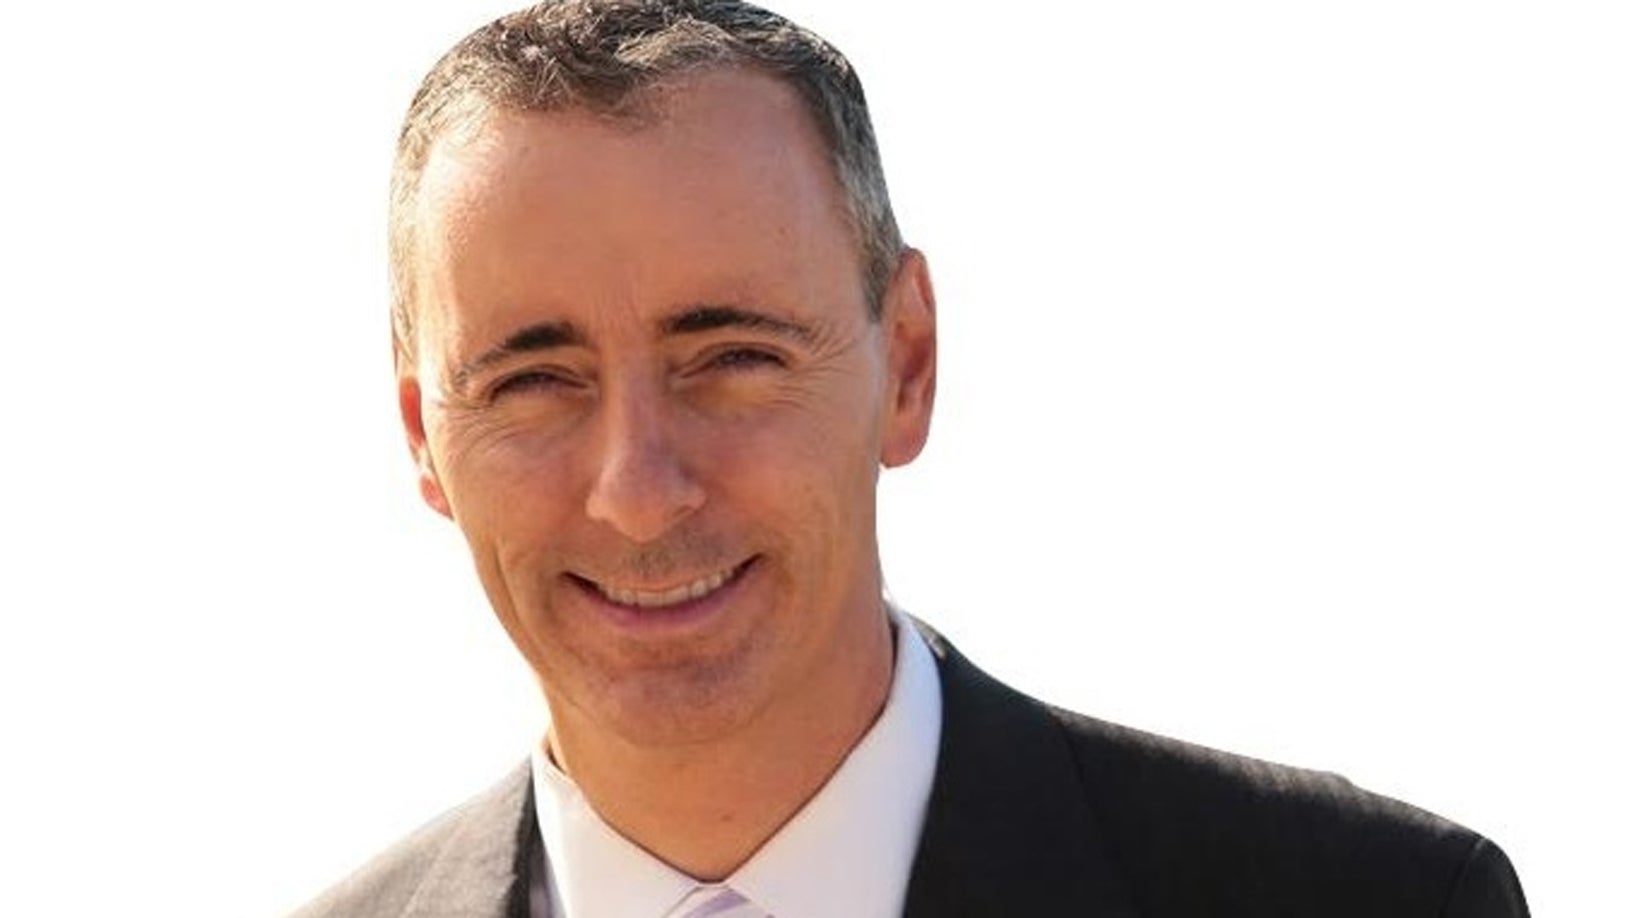  Brian Fitzpatrick, a former supervisory special agent with the FBI and younger brother of incumbent Mike Fitzpatrick, is running for Pennsylvania's 8th Congressional District seat. (Image courtesy of Montgomery County Democracy for America) 